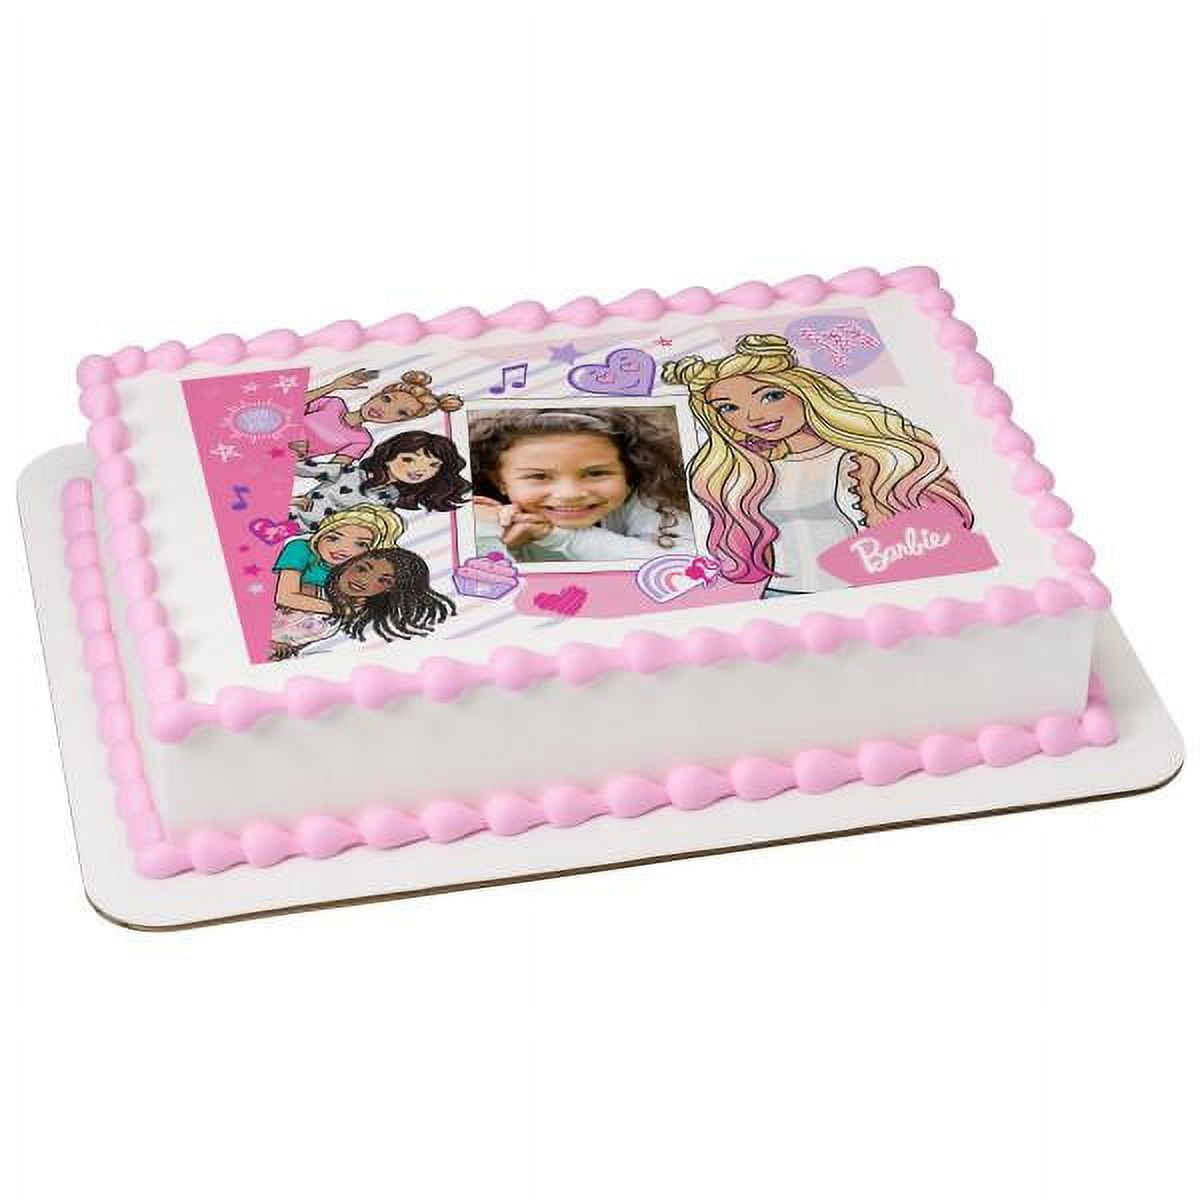 Barbie Be You Edible Cake Topper Image Frame 